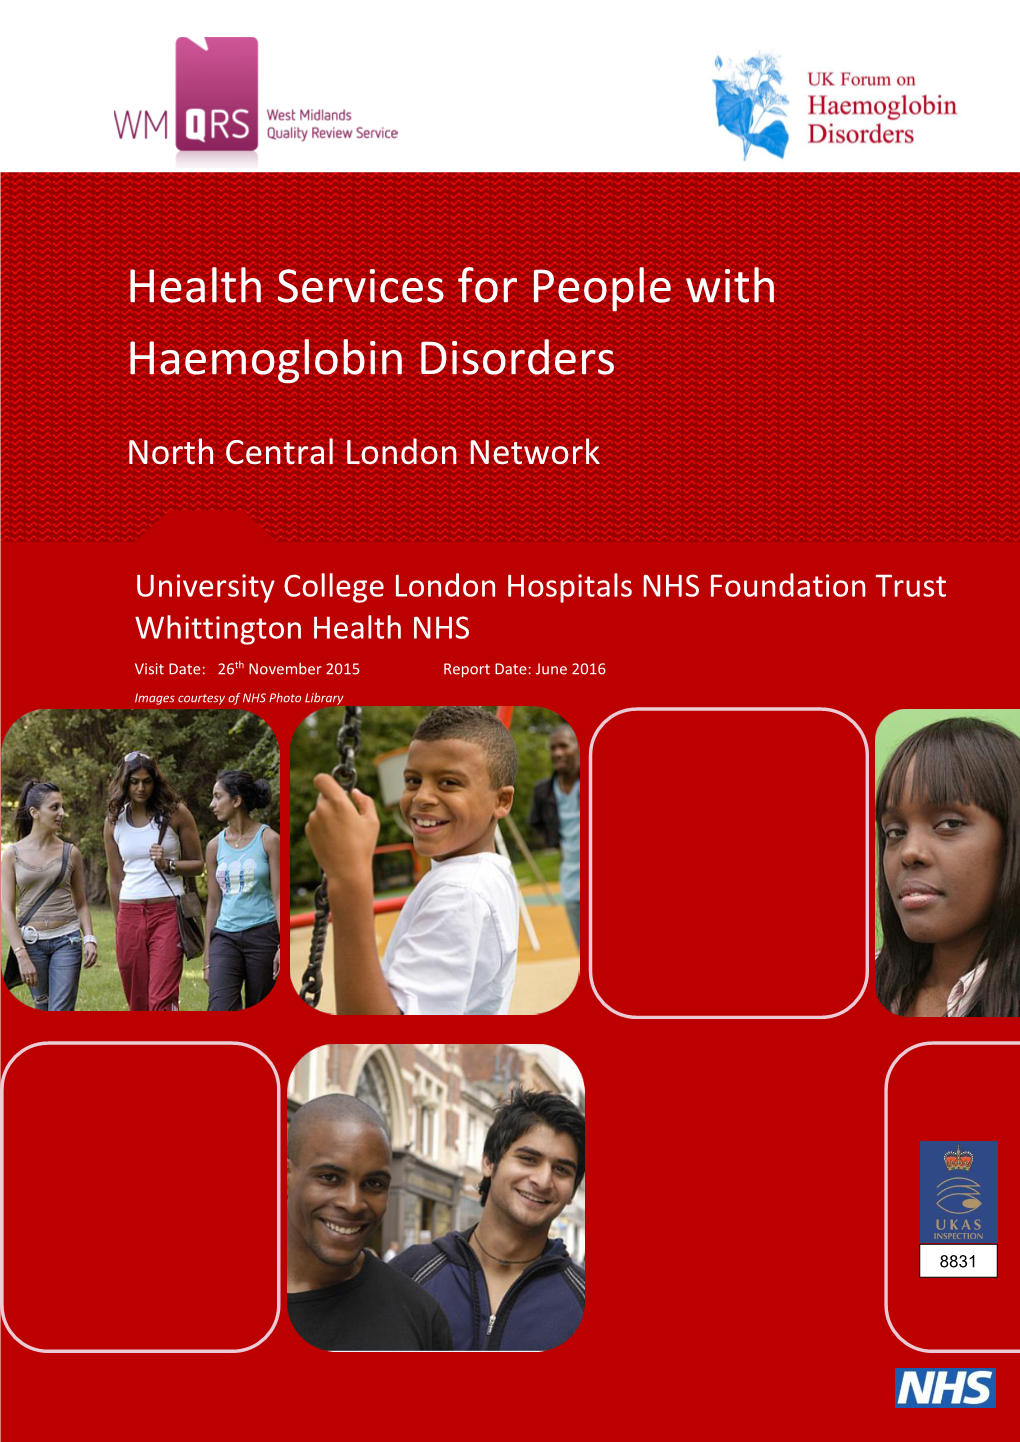 Health Services for People with Haemoglobin Disorders